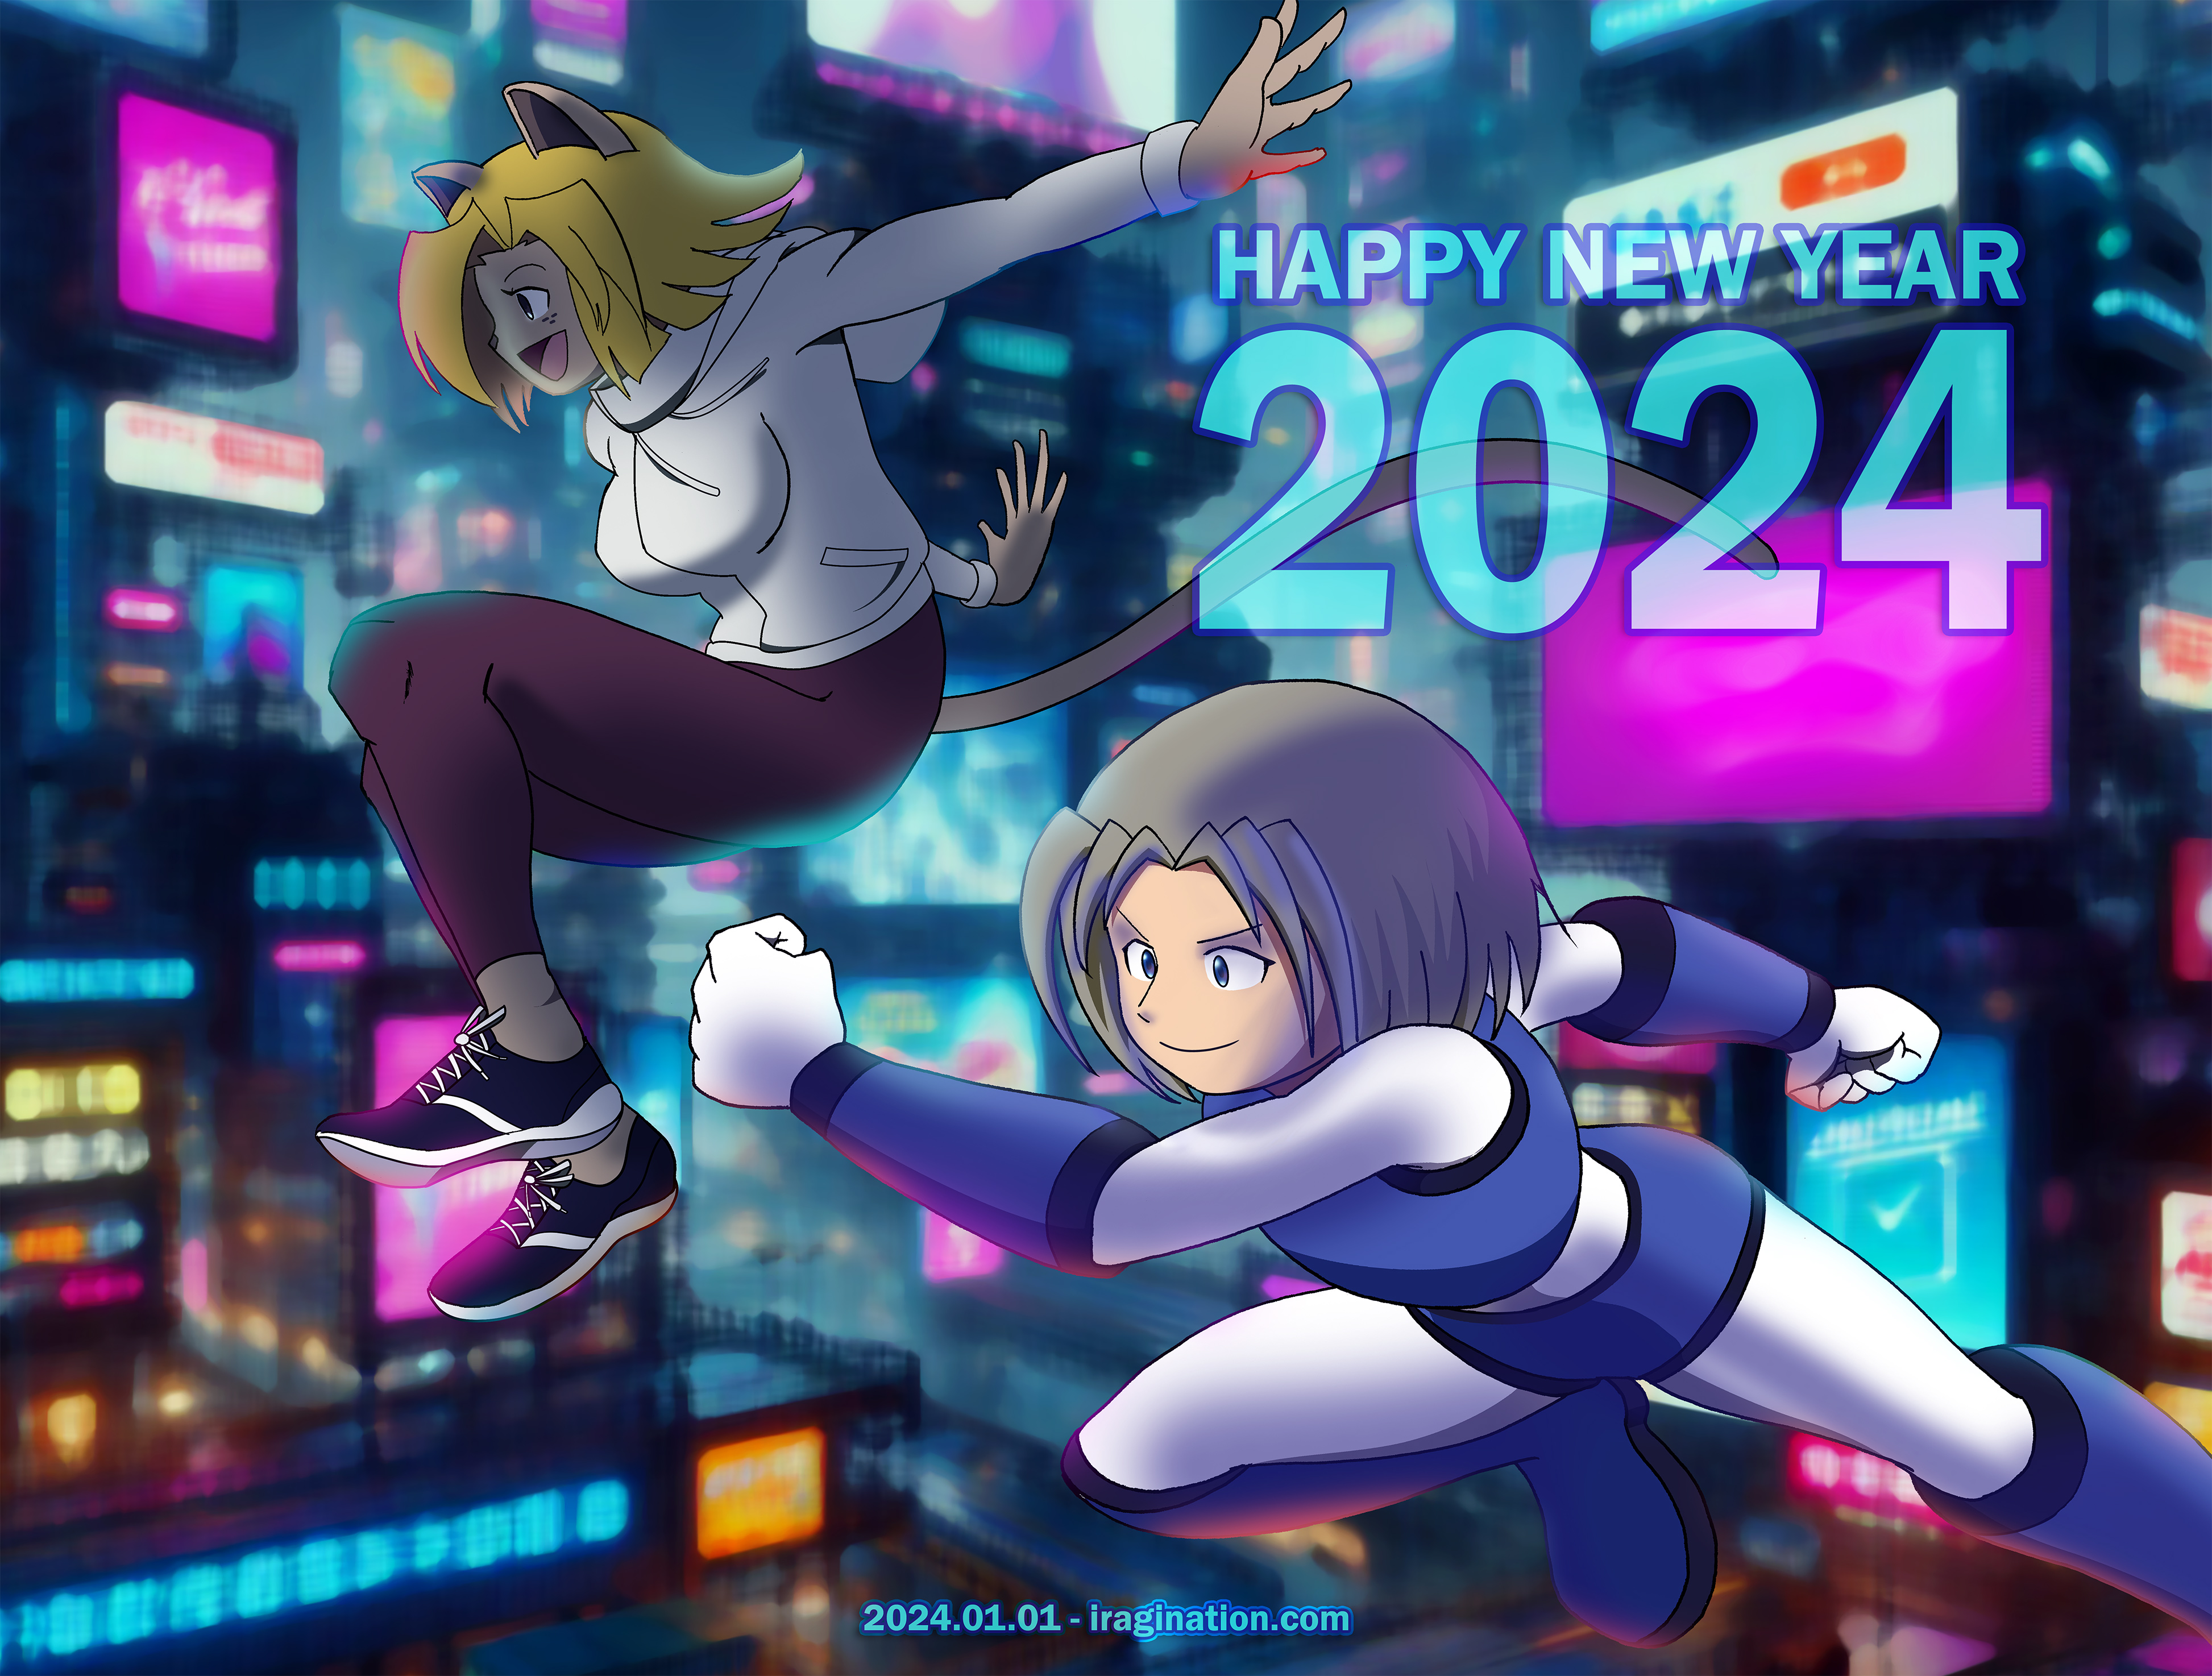 Happy New Year 2024
Just so you know, the background is AI-assisted.

It has been an interesting year in terms of AI-assisted content creation. Generating this type of background is incredibly helpful and it's exactly what I need. This allows me to prioritize my main interest, which is drawing characters.

However, I don’t believe this is an excuse to neglect studying and practicing all other aspects of art, especially if one wants to improve. Fundamental skills like perspective, anatomy, composition, and color theory are always relevant. I still have a lot to read and experiment in these areas.

[b]References[/b]
[url=https://www.bing.com/images/create/cyberpunk-landscape-with-many-billboards-with-fake/1-658f8d69eee447e09bbd5df487b8f194?id=mZM1DKCzfgM2v3MU33XTNw%3d%3d&view=detailv2&idpp=genimg&FORM=GCRIDP&mode=overlay]Bing Image Creator[/url]

Leika and Delia © IRAGINATION
Keywords: delia leika